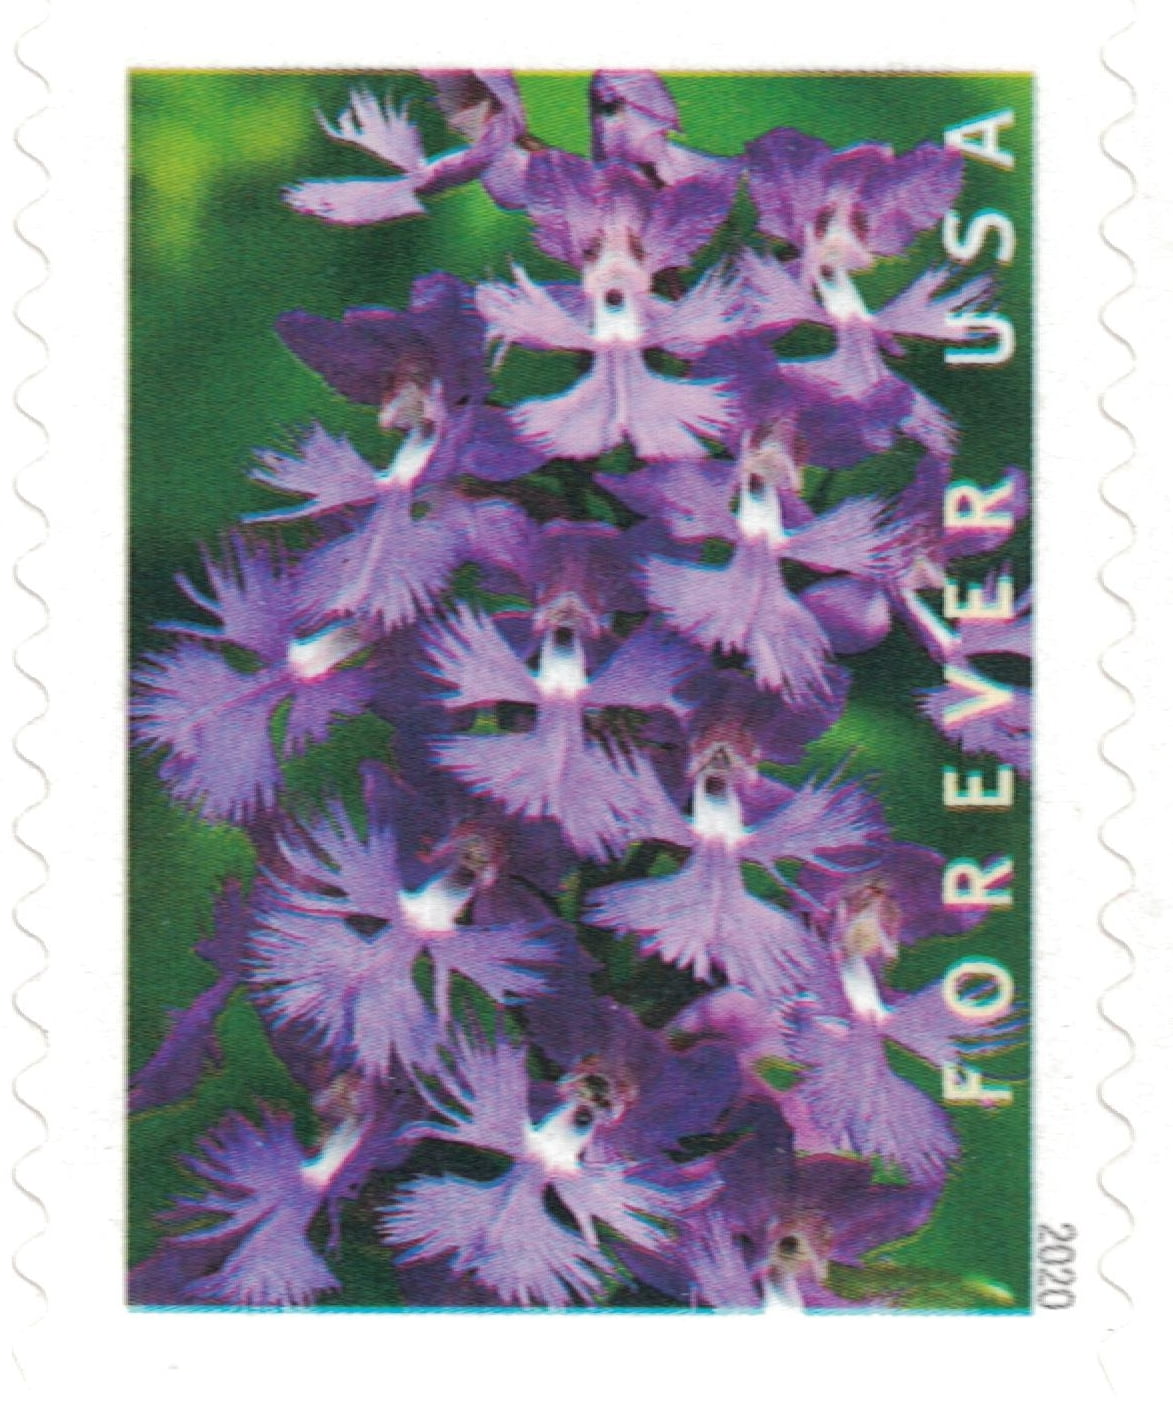 YBW USPS Wild Orchids Flowers Forever Stamps Postal First Class US Postage  Stamps Birthday Wedding Celebration Engagement Anniversary Bridal Shower